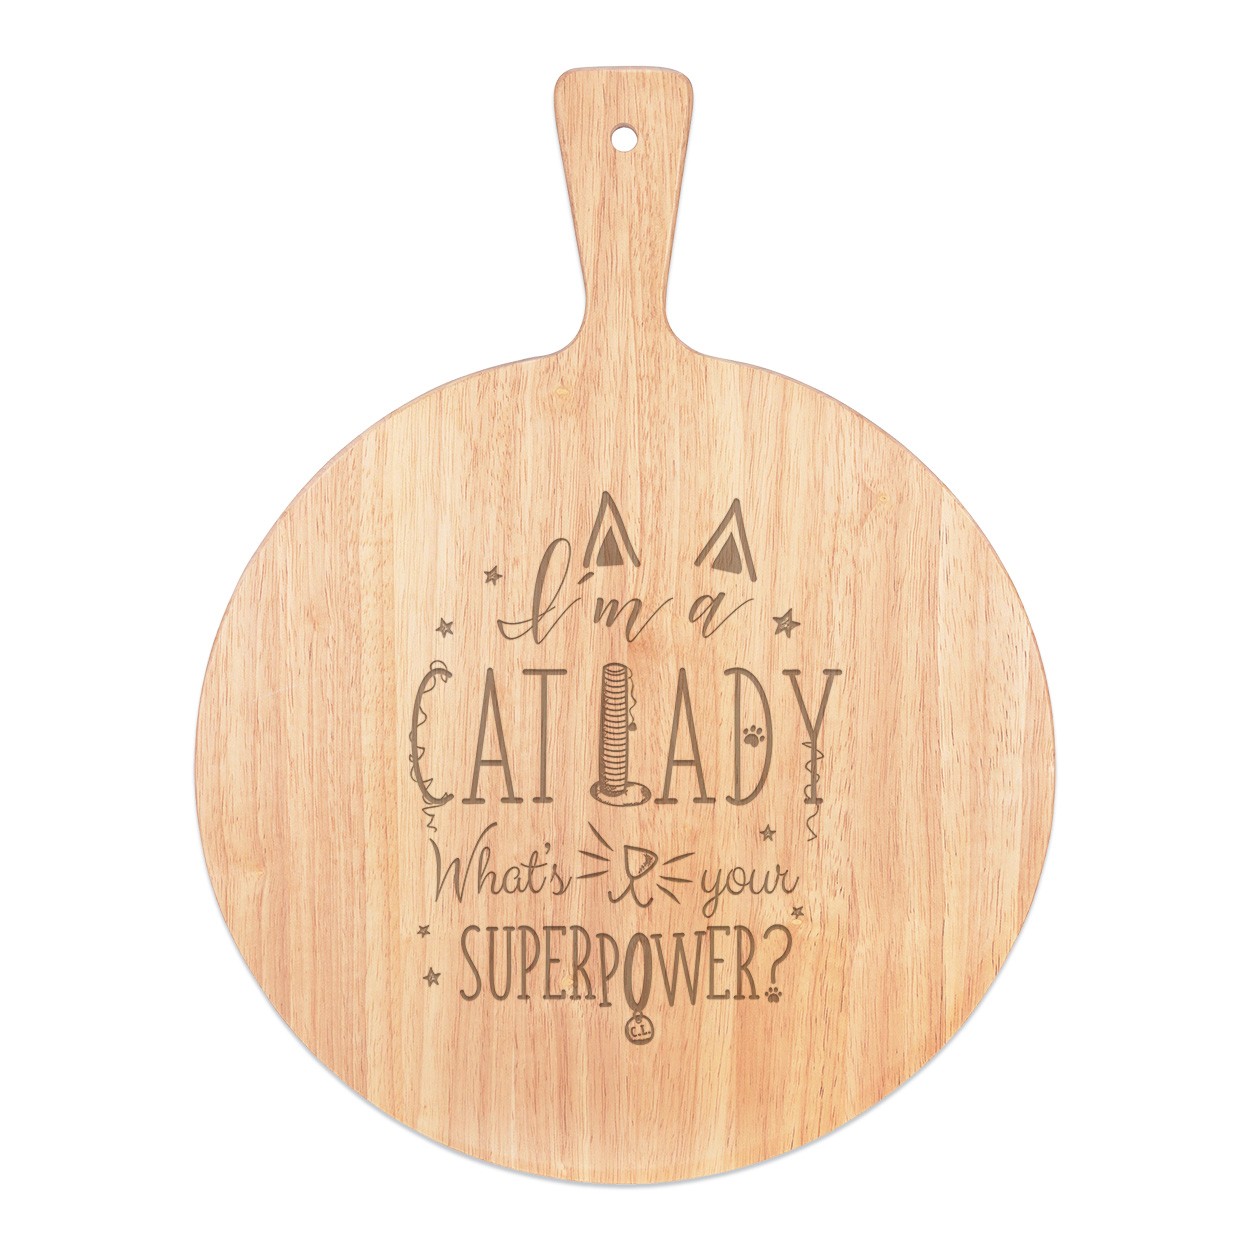 I'm A Cat Lady What's Your Superpower Pizza Board Paddle Serving Tray Handle Round Wooden 45x34cm